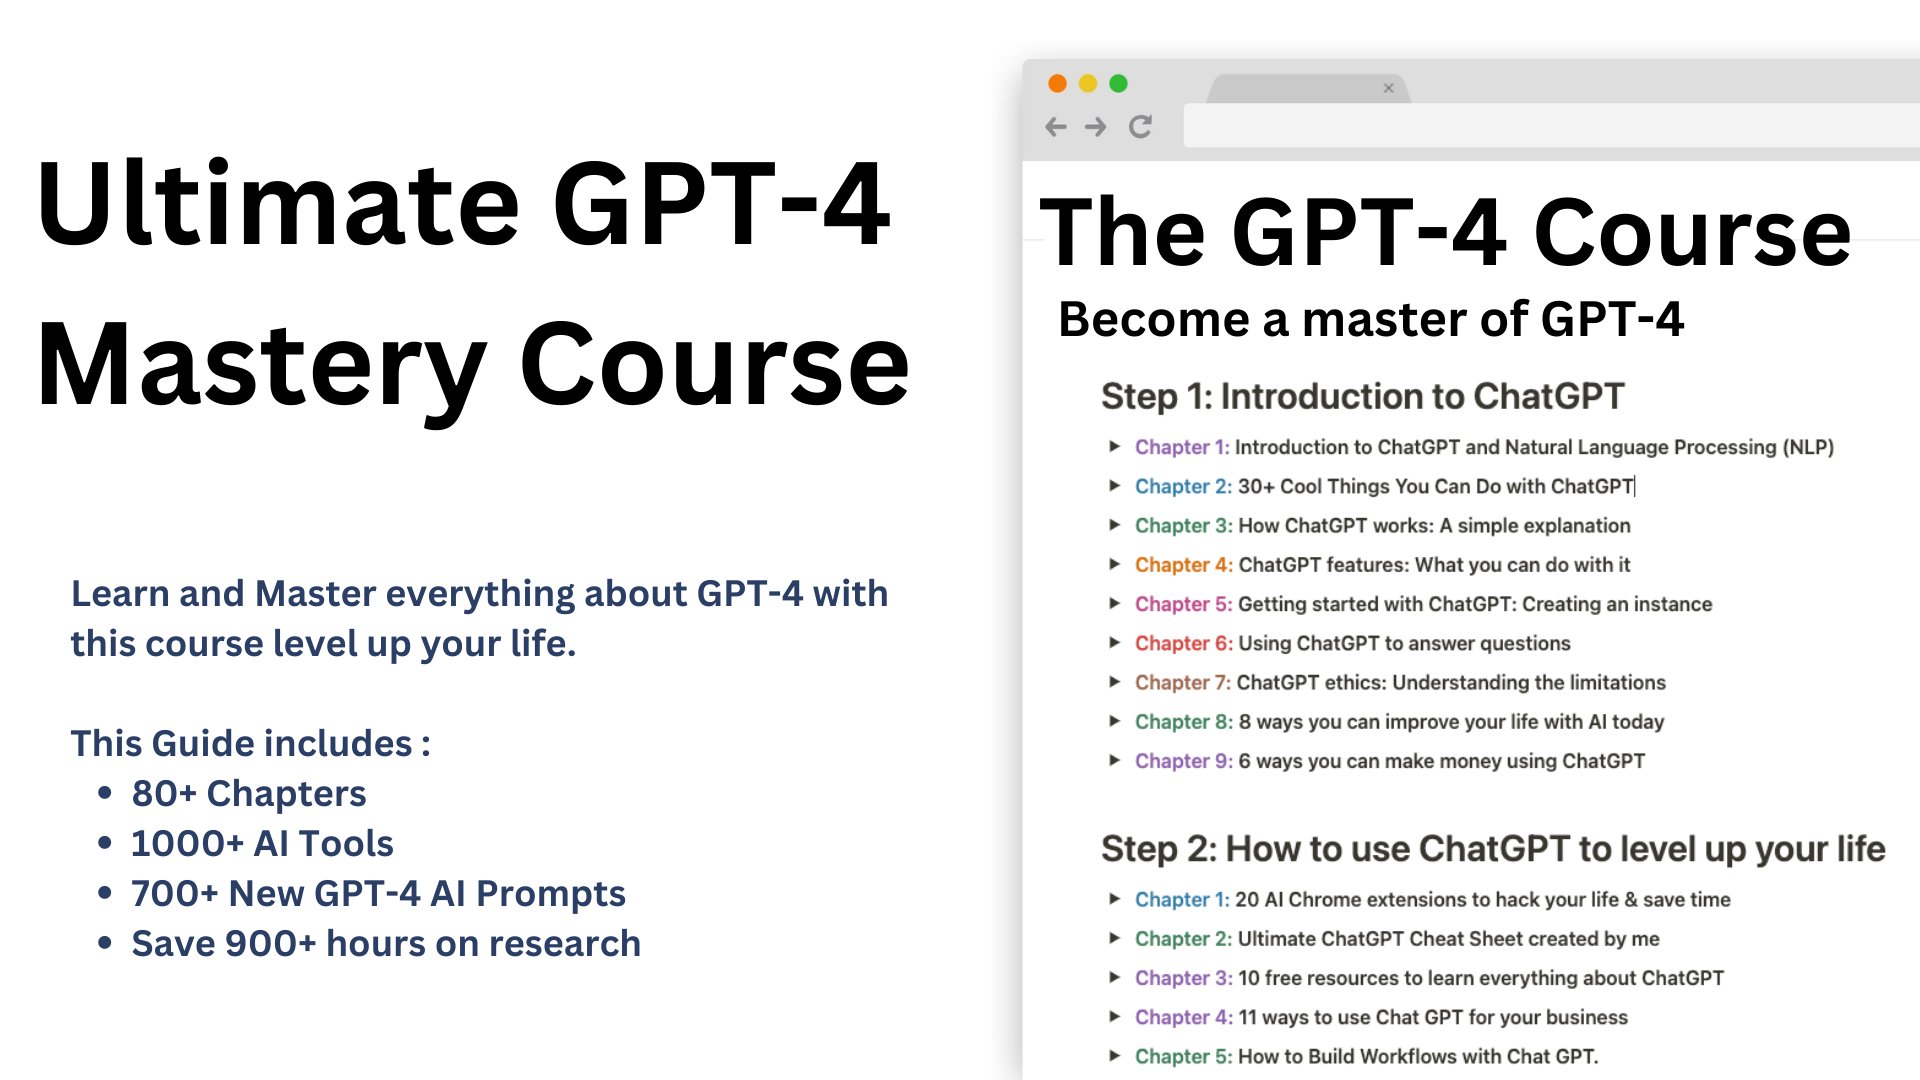 GPT-4 can be used for FREE using this simple hack. Follow these 3 steps